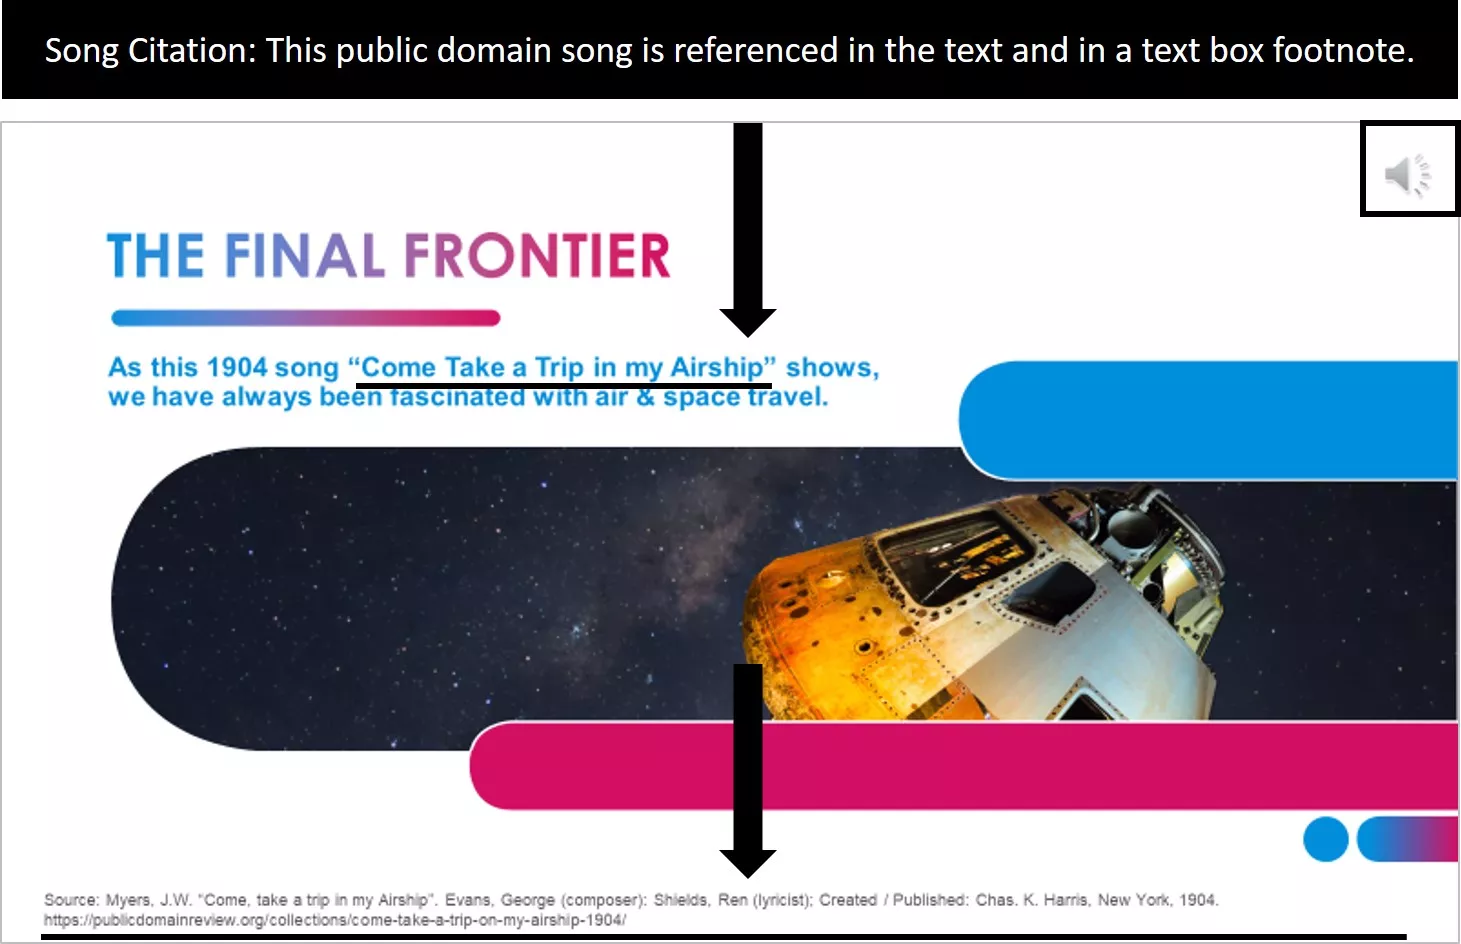 Example of a slide with a footer citation for a song.